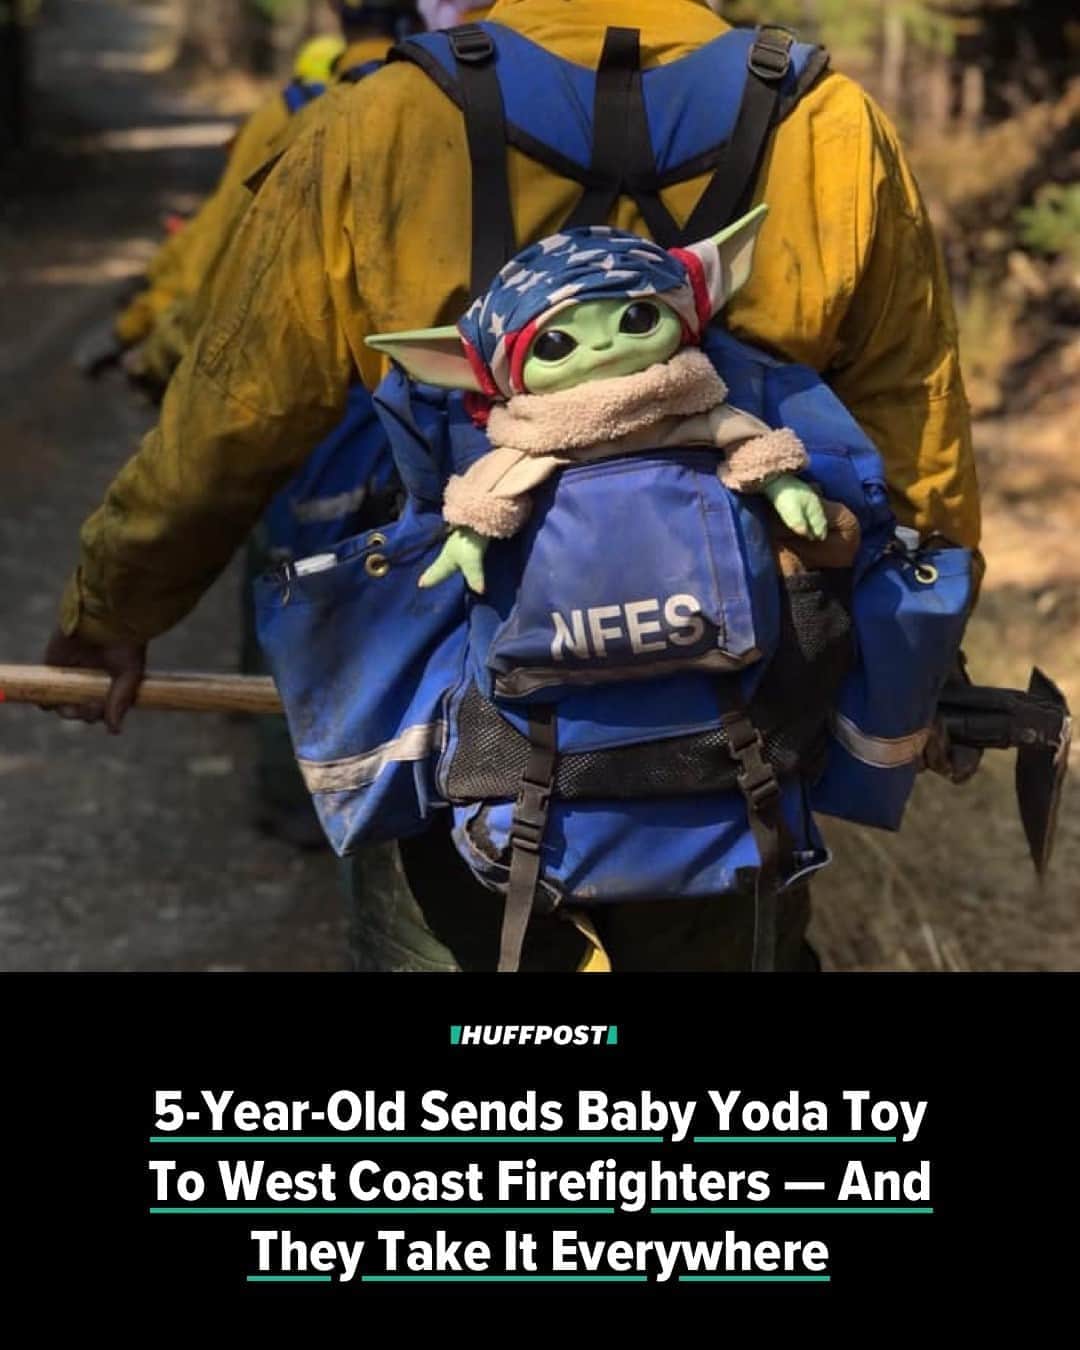 Huffington Postさんのインスタグラム写真 - (Huffington PostInstagram)「A plush toy of Baby Yoda ― formally known as “The Child” on the “Star Wars” spinoff “The Mandalorian” ― has become an unlikely fixture among firefighting squads across the country.⁠ ⁠ The doll was originally donated to fire crews in Scappoose, Oregon, by Sasha Tinning and her 5-year-old grandson, Carver, who found it at a local store and decided that firefighters needed it more than him.⁠ ⁠ “I have always wanted to help and uplift anyone that’s around me,” Carver told news outlet KSAT. “And this really was a bright spot in a dark time I wanted to share with everyone.”⁠ ⁠ Carver and his grandmother donated Baby Yoda in early September, attaching the doll with a tender note that read: “Thank you firefighters. Here is a friend in case you get lonely.”⁠ ⁠ Over the course of the last month, Baby Yoda has been passed around, traveling a remarkable road not dissimilar to his space-faring expeditions on Disney+. The doll has appeared at the sites of multiple blazes burning within both California and Oregon ― including the Lionshead fire, Holiday Farm fire and Riverside fire ― and posed in photos with Oregon National Guard personnel and members of the Federal Emergency Management Agency. On Monday, The Child arrived in Colorado to assist with the Cameron Peak fire in Larimer County.⁠ ⁠ Since Sept. 15, the adventures of Baby Yoda have been documented on a Facebook page set up by Scappoose resident Tyler Eubanks, who coordinated the donation that gave the alien his new home among firefighters.⁠ ⁠ The page ― which had over 24,000 likes as of Tuesday ― has become the home of images, news articles and TikToks showing Baby Yoda’s popularity.⁠ ⁠ Commenting on the doll’s appeal among fire crews, Tinning told CNN, “To have a little bit of sunshine during such a dark time ... [is] really special for them.” See more at our link in bio! // 📷 Baby yoda fights fires/Facebook」10月1日 8時14分 - huffpost